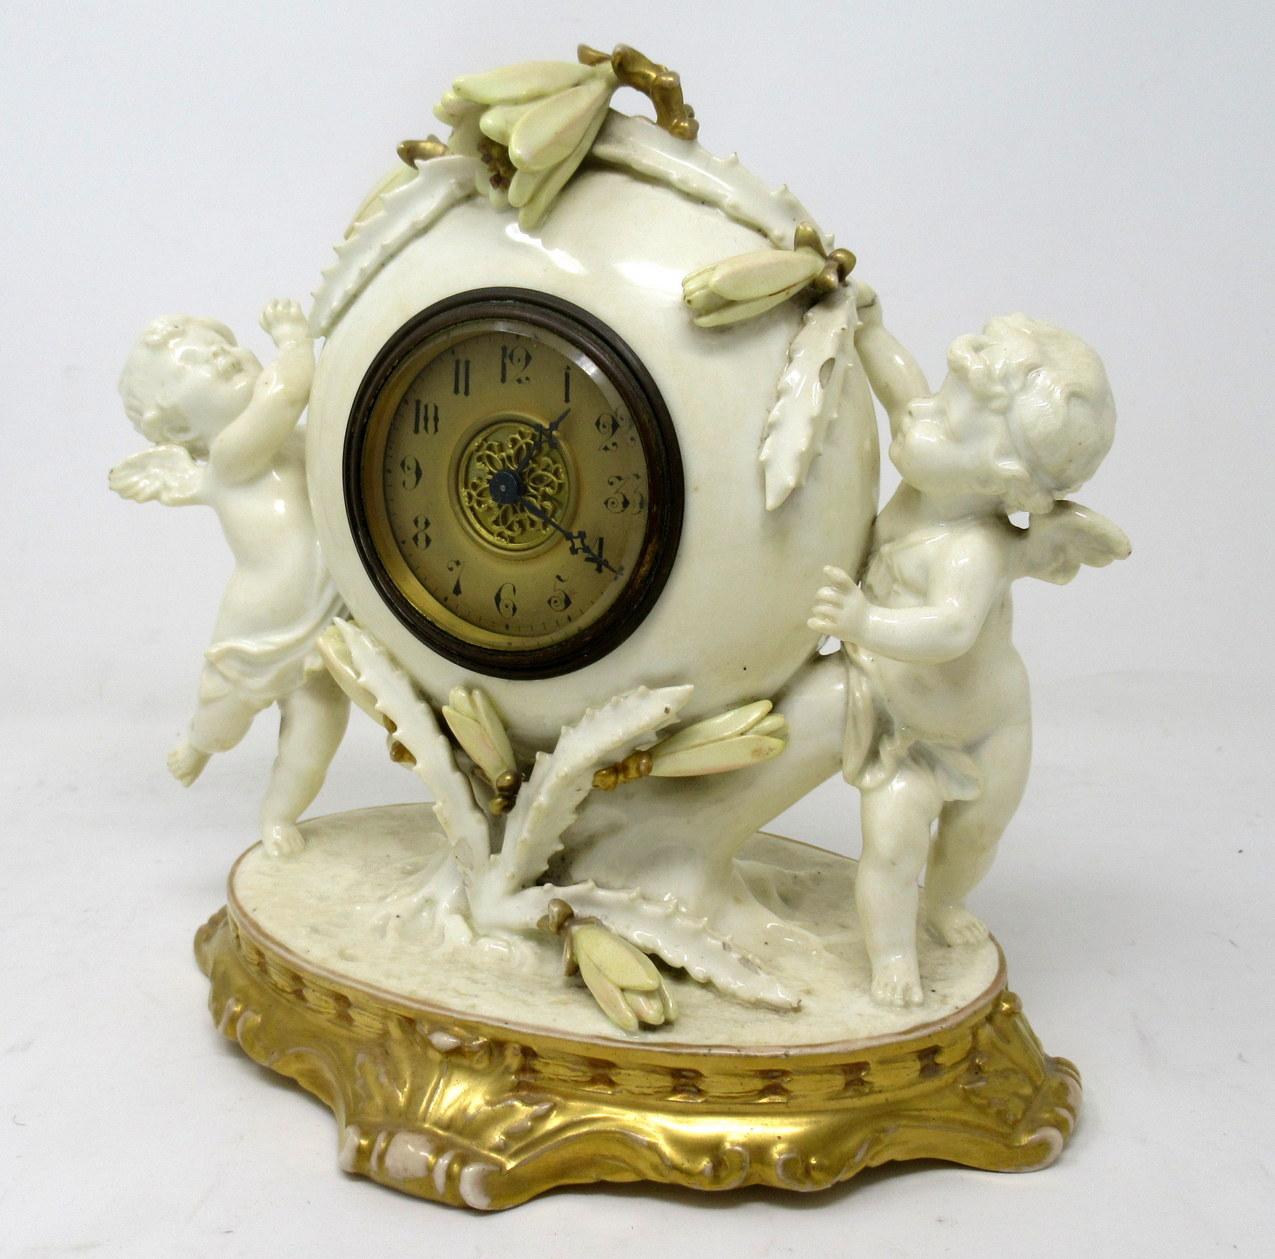 A very unusual and possibly quite rare English Moore Glazed Porcelain mantel (fireplace) timepiece clock of impressive proportions. The circular 7cm. dial of ormolu with Arabic numerals, the circular porcelain case moulded with flowering cacti